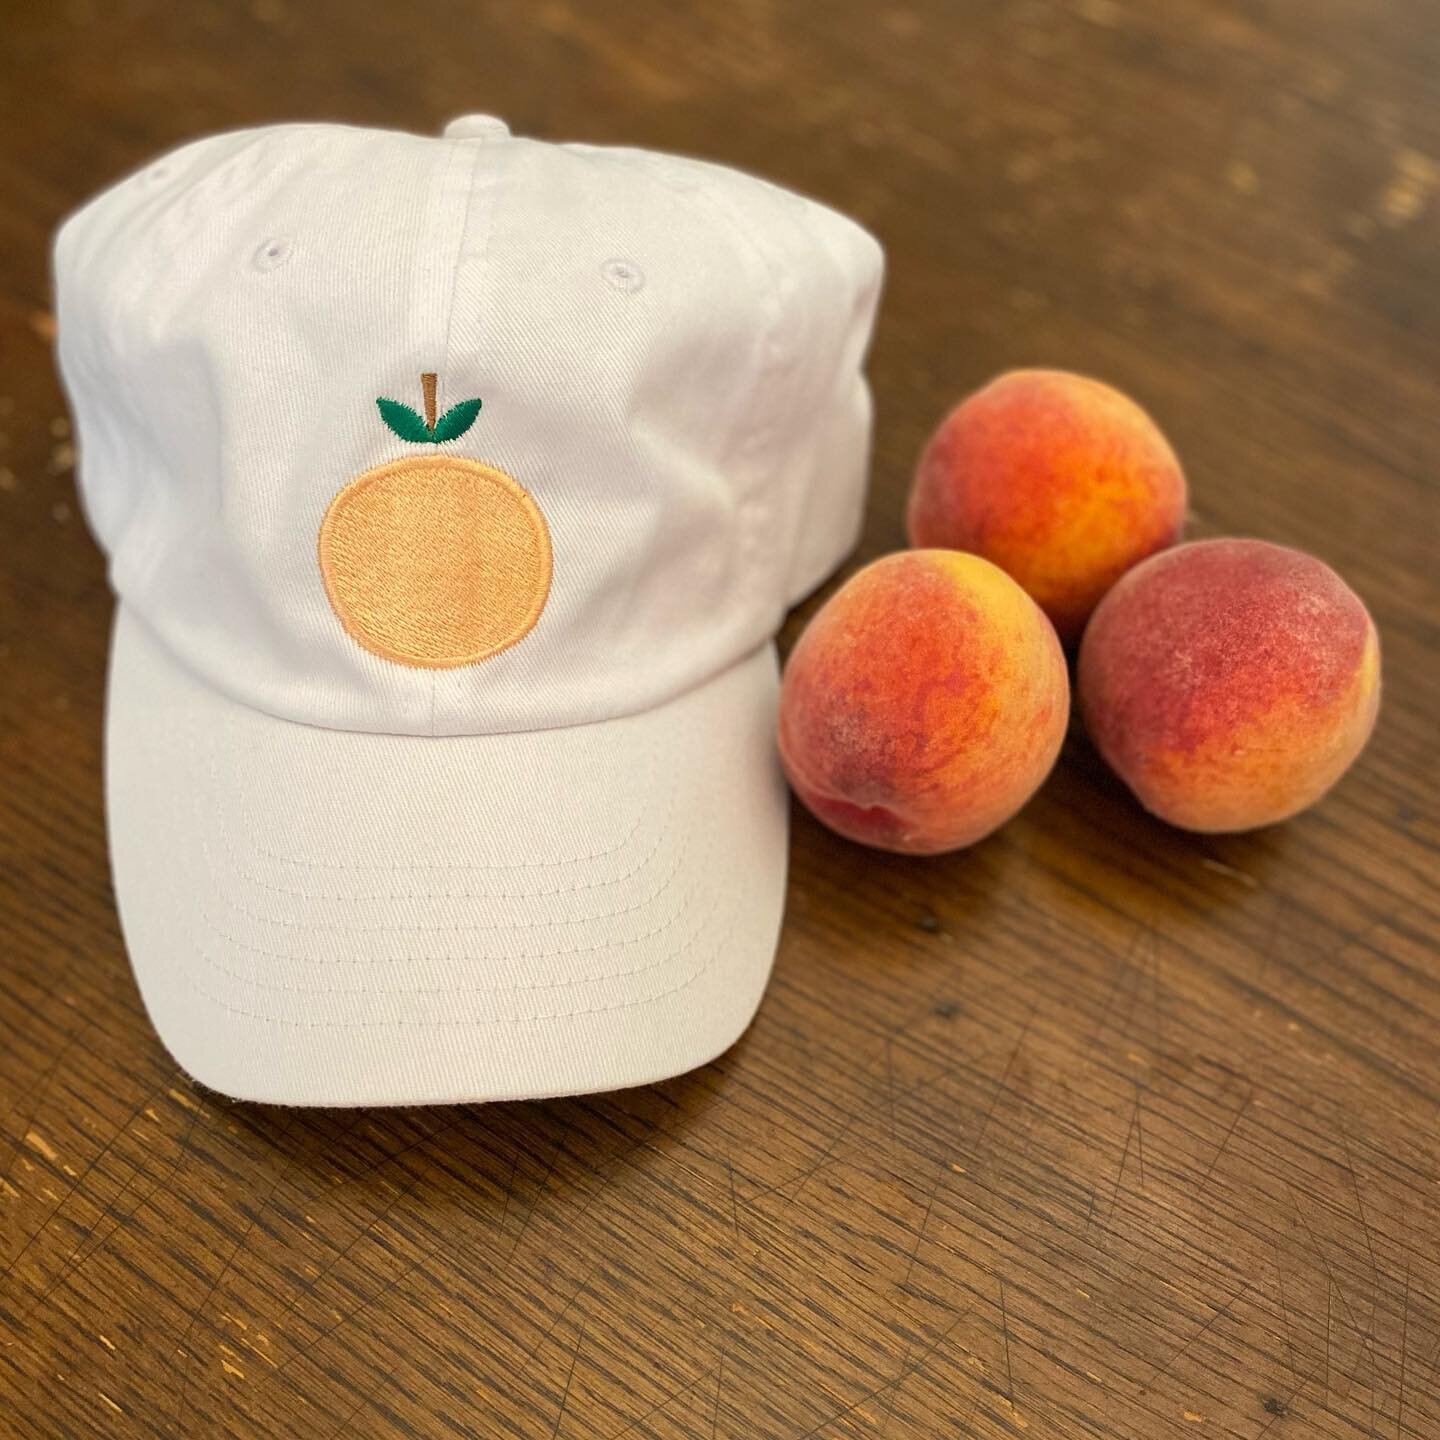 🍑 NOW IN SEASON! 🍑

Our signature peach logo is embroidered on our favorite white baseball caps. 

This run is limited! Hats will be available tomorrow at the Main Street Farmers Market from 3-7p and on our website tomorrow night!